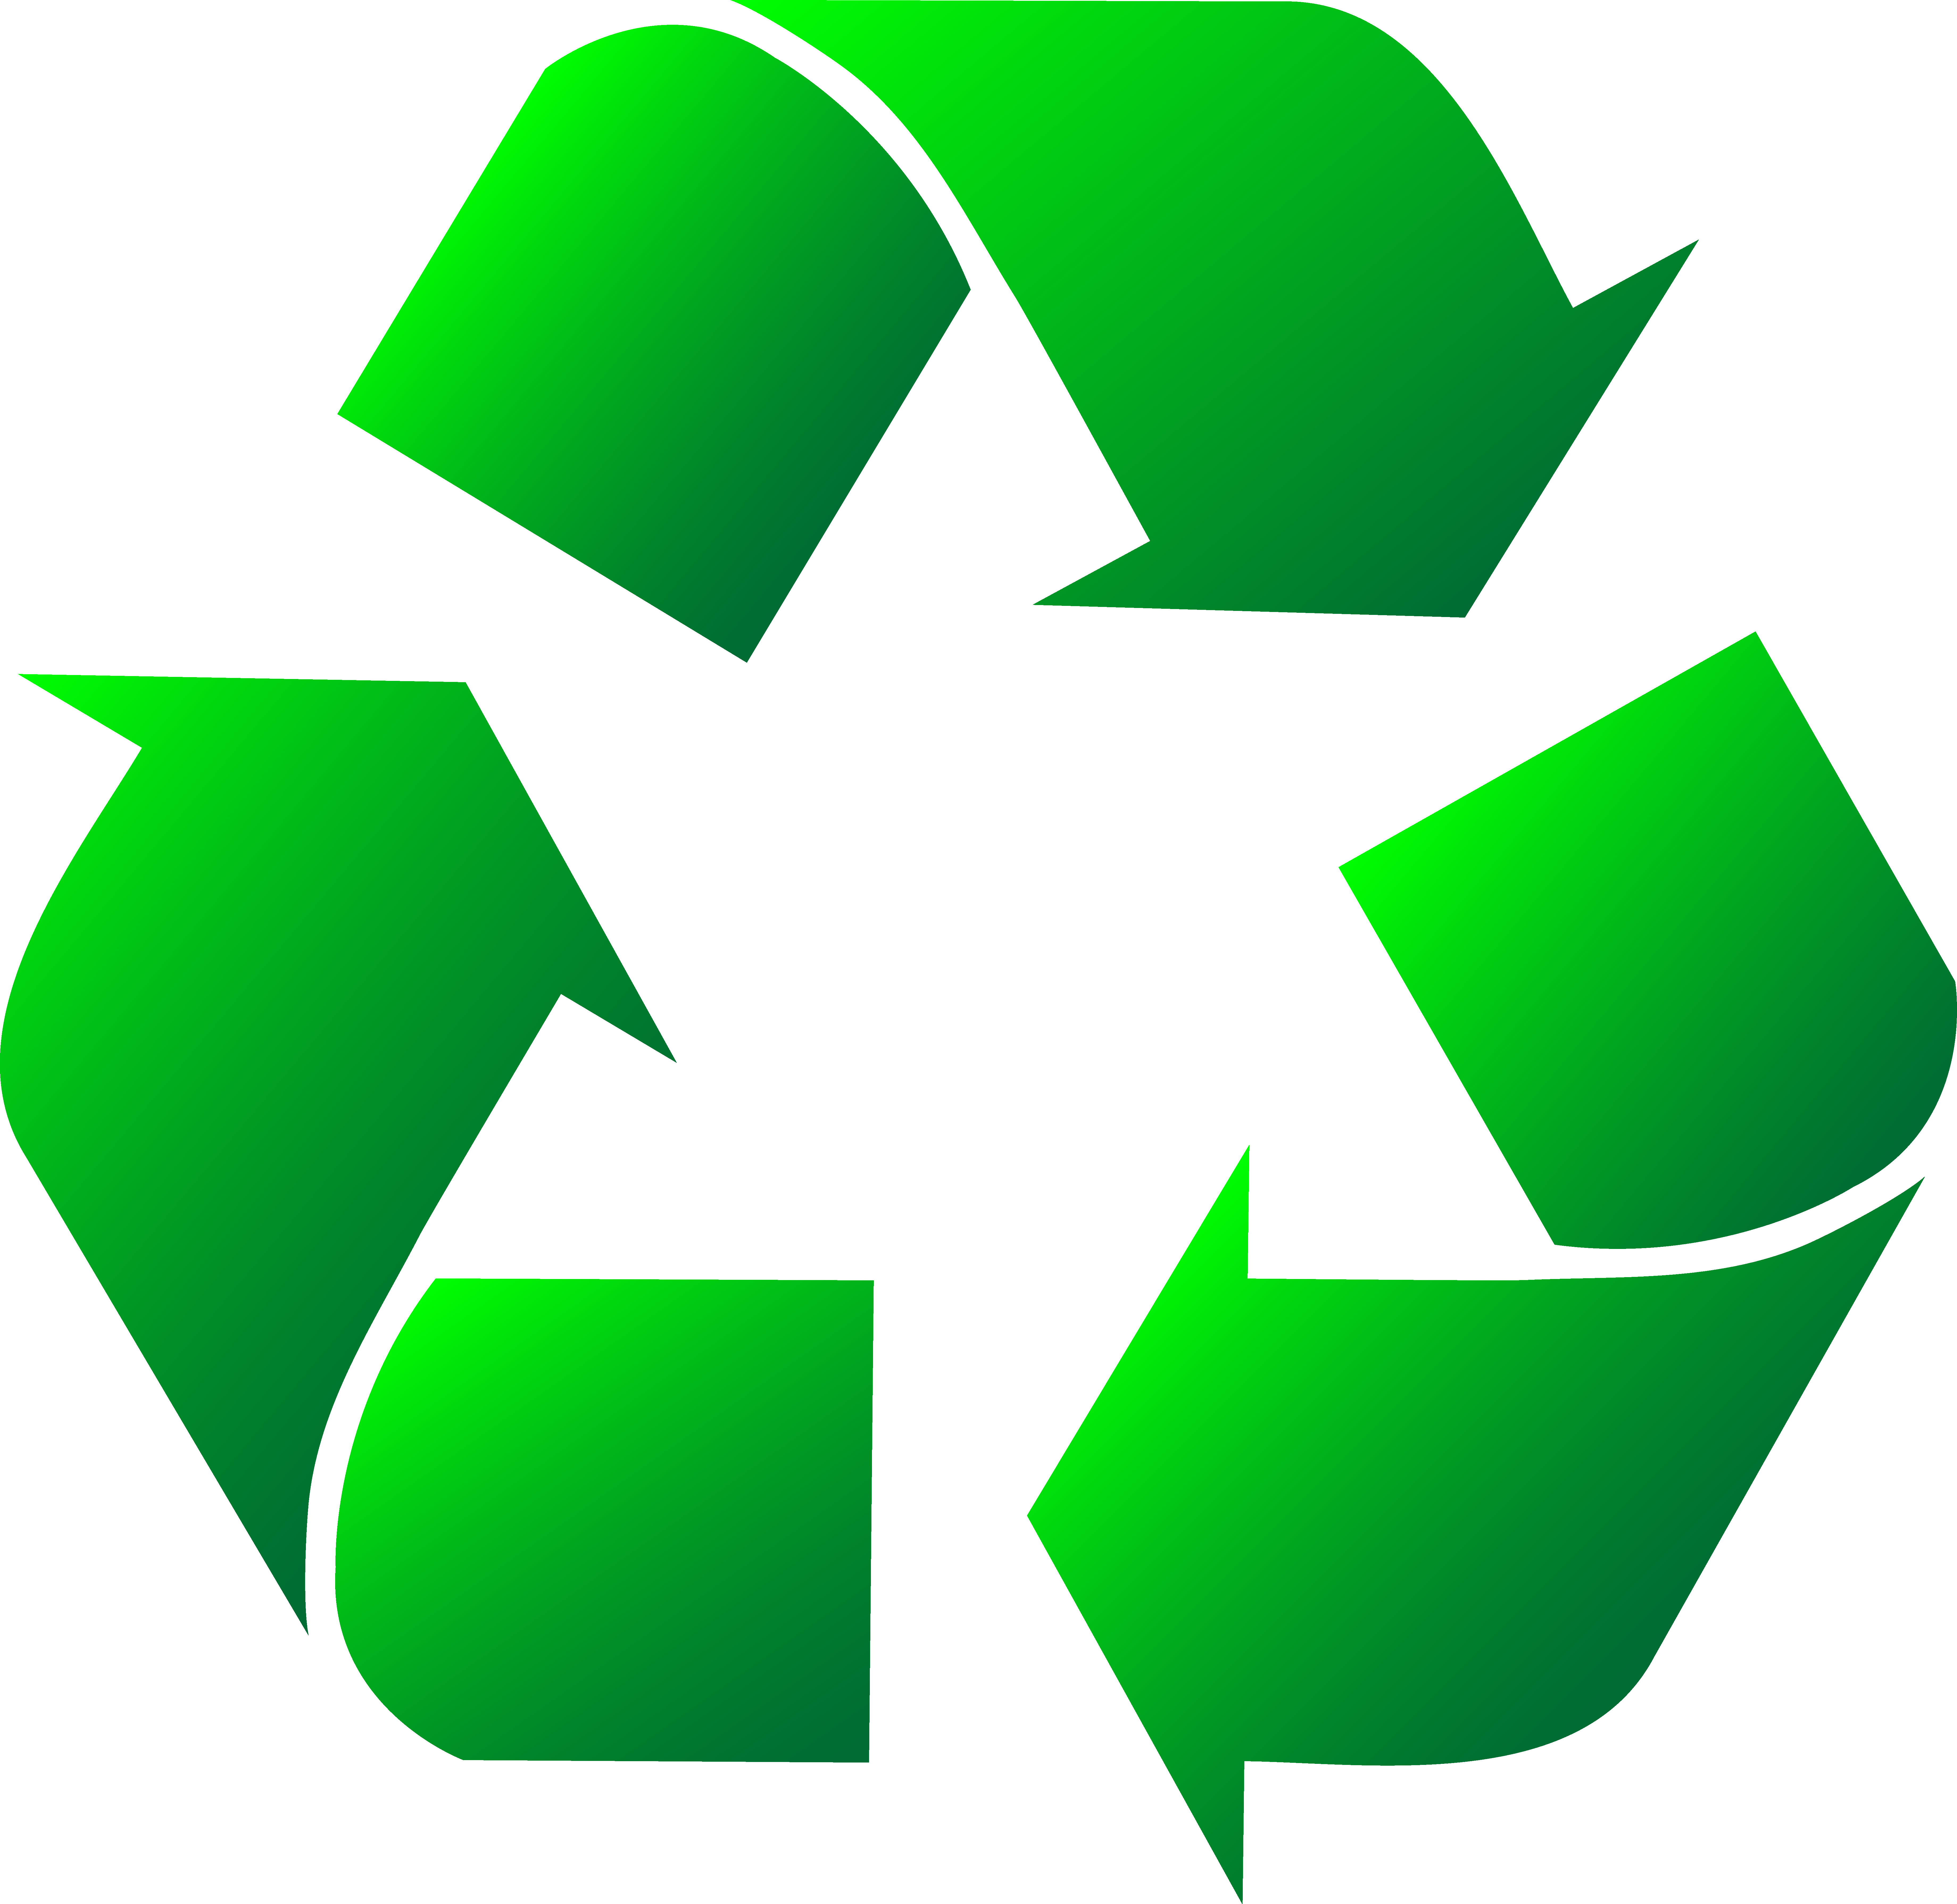 Free Recycle Picture, Download Free Clip Art, Free Clip Art